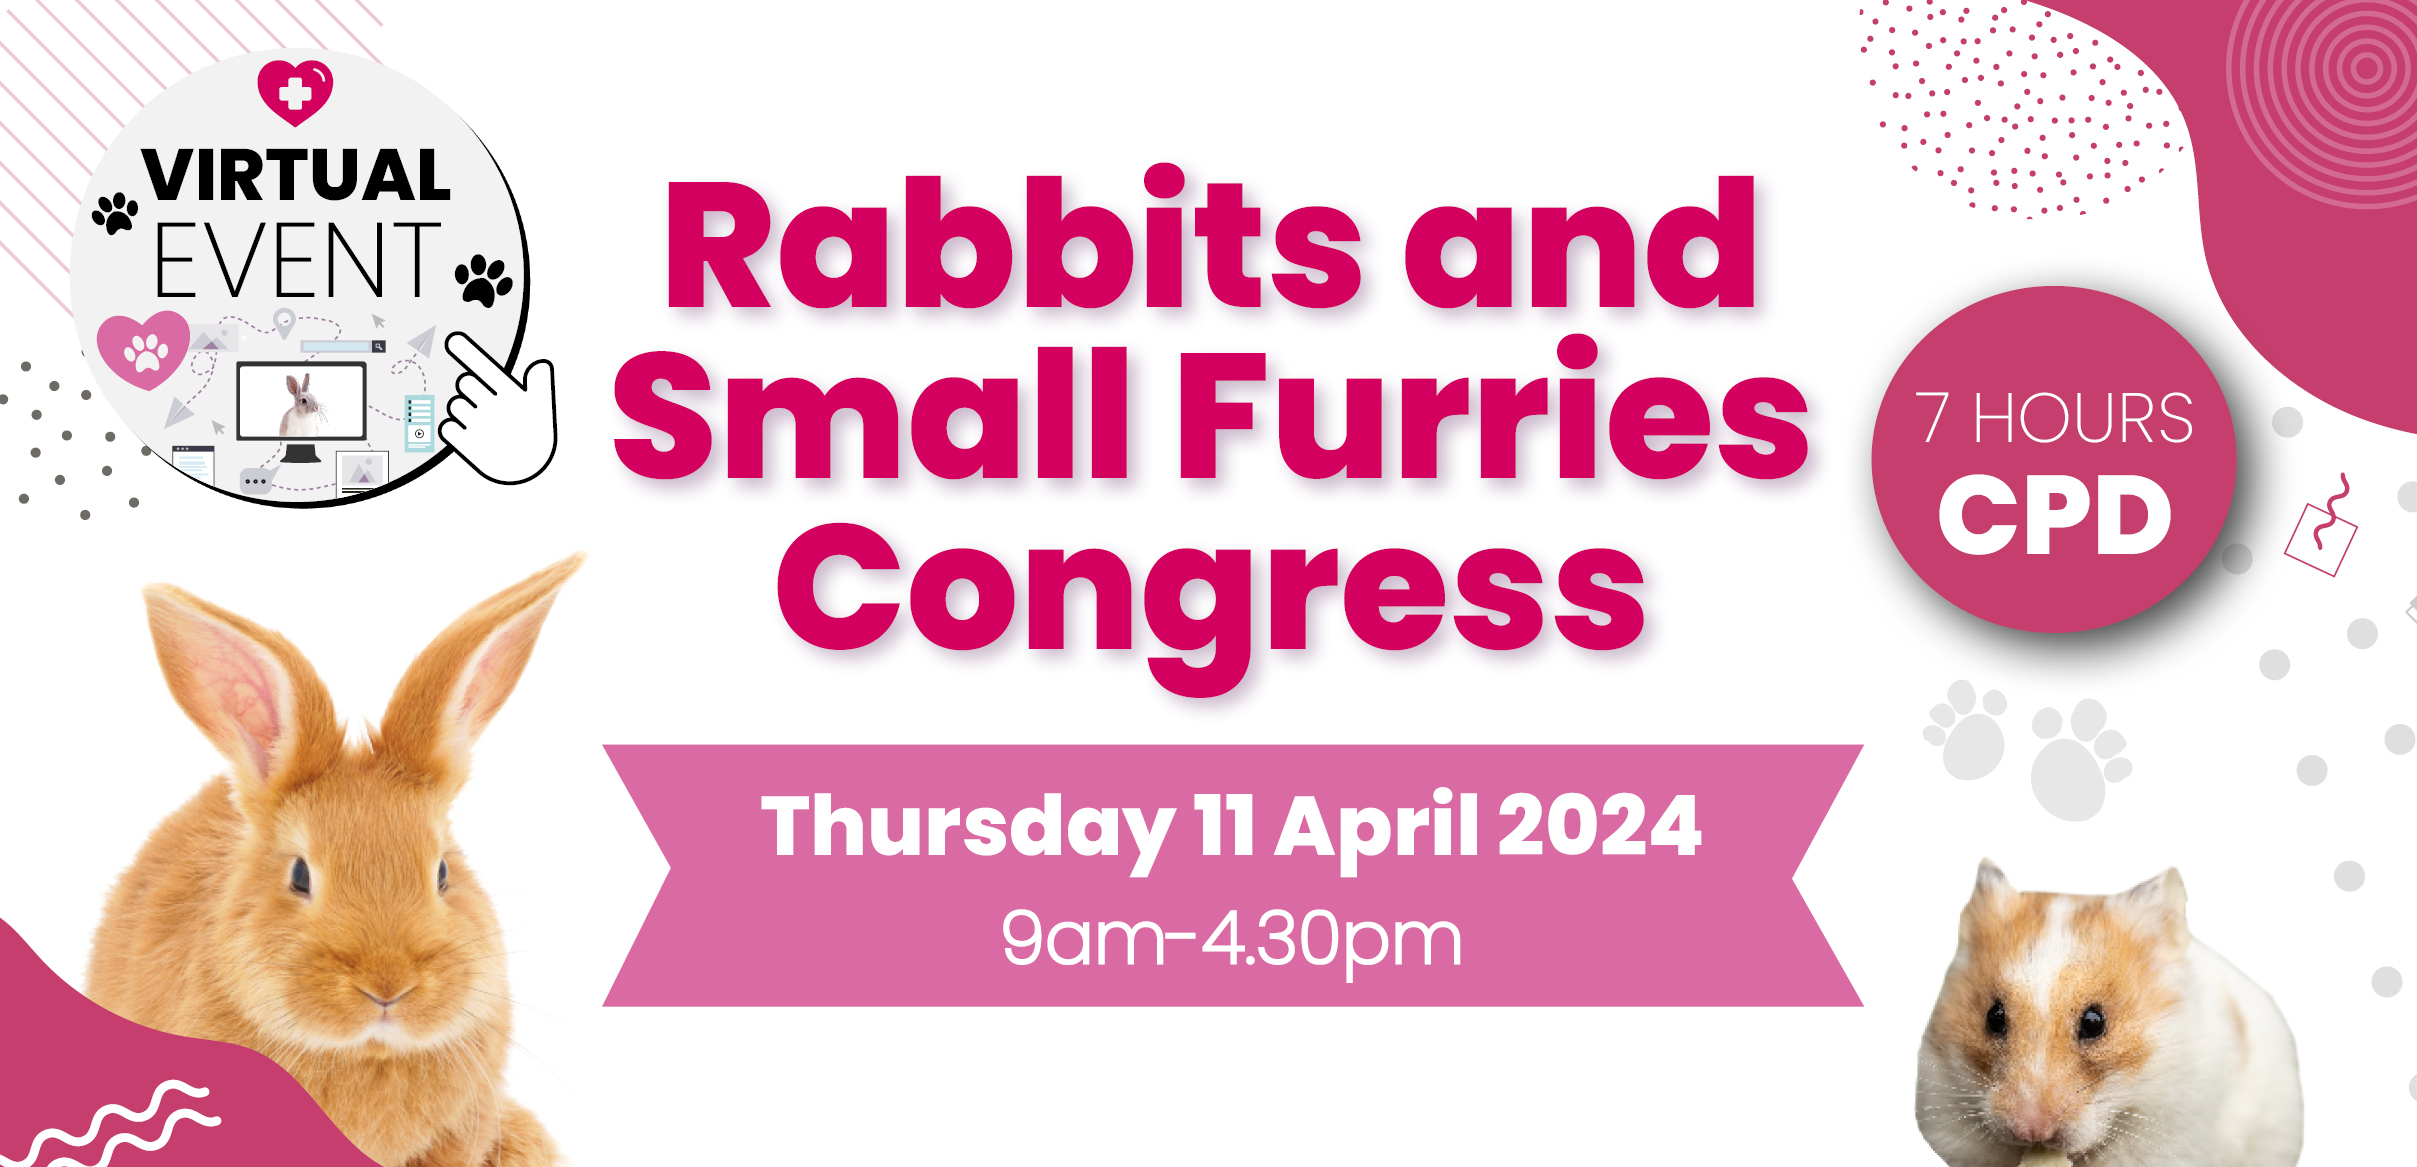 Rabbits and Small Furries Congress